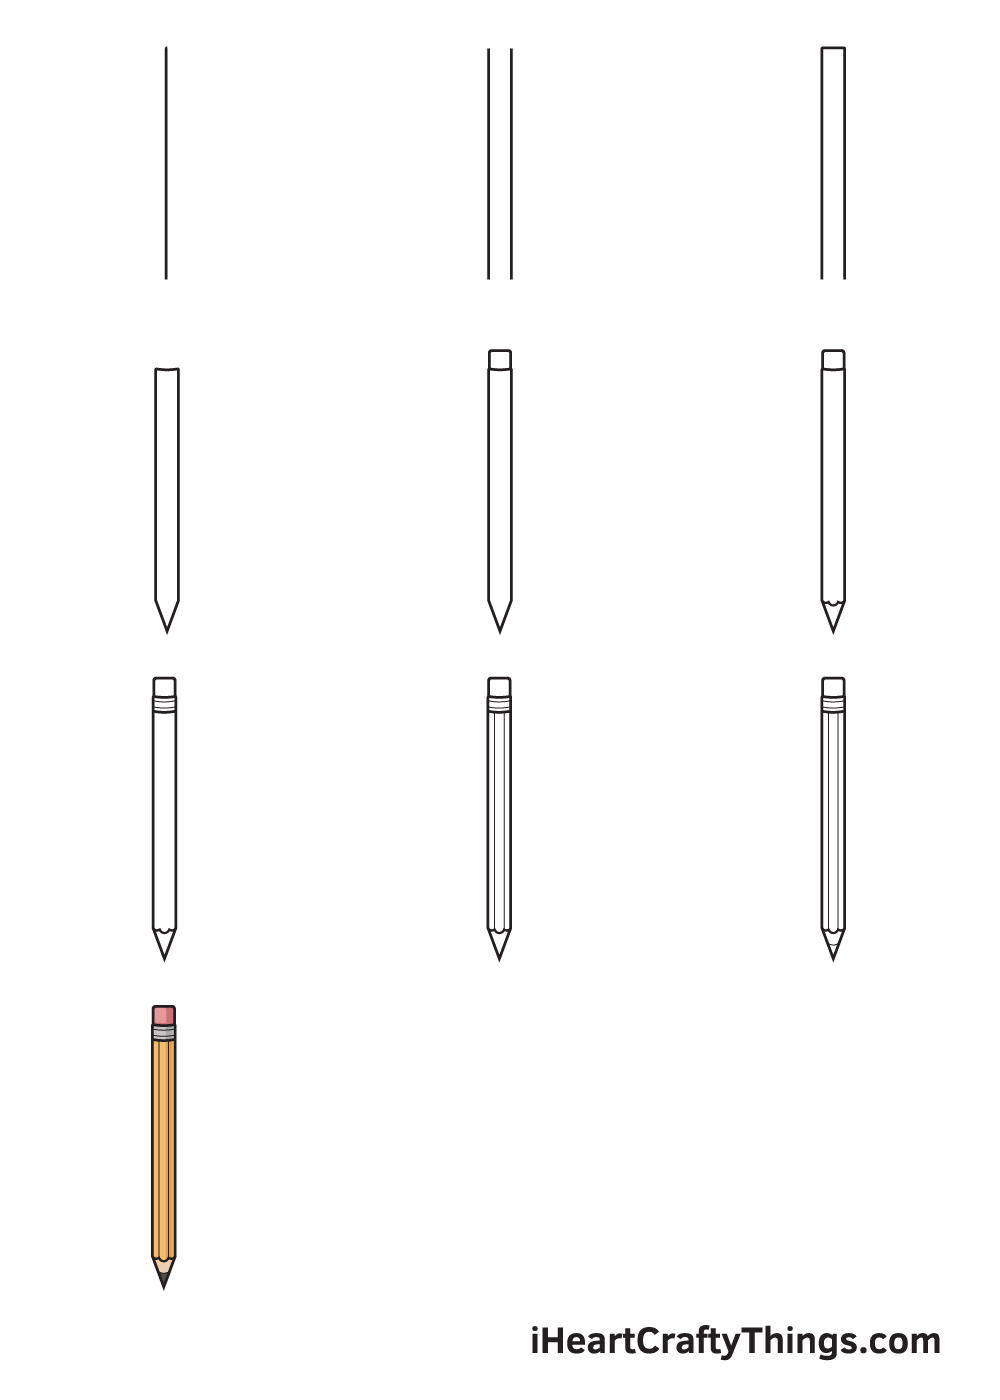 drawing pencil in 9 steps